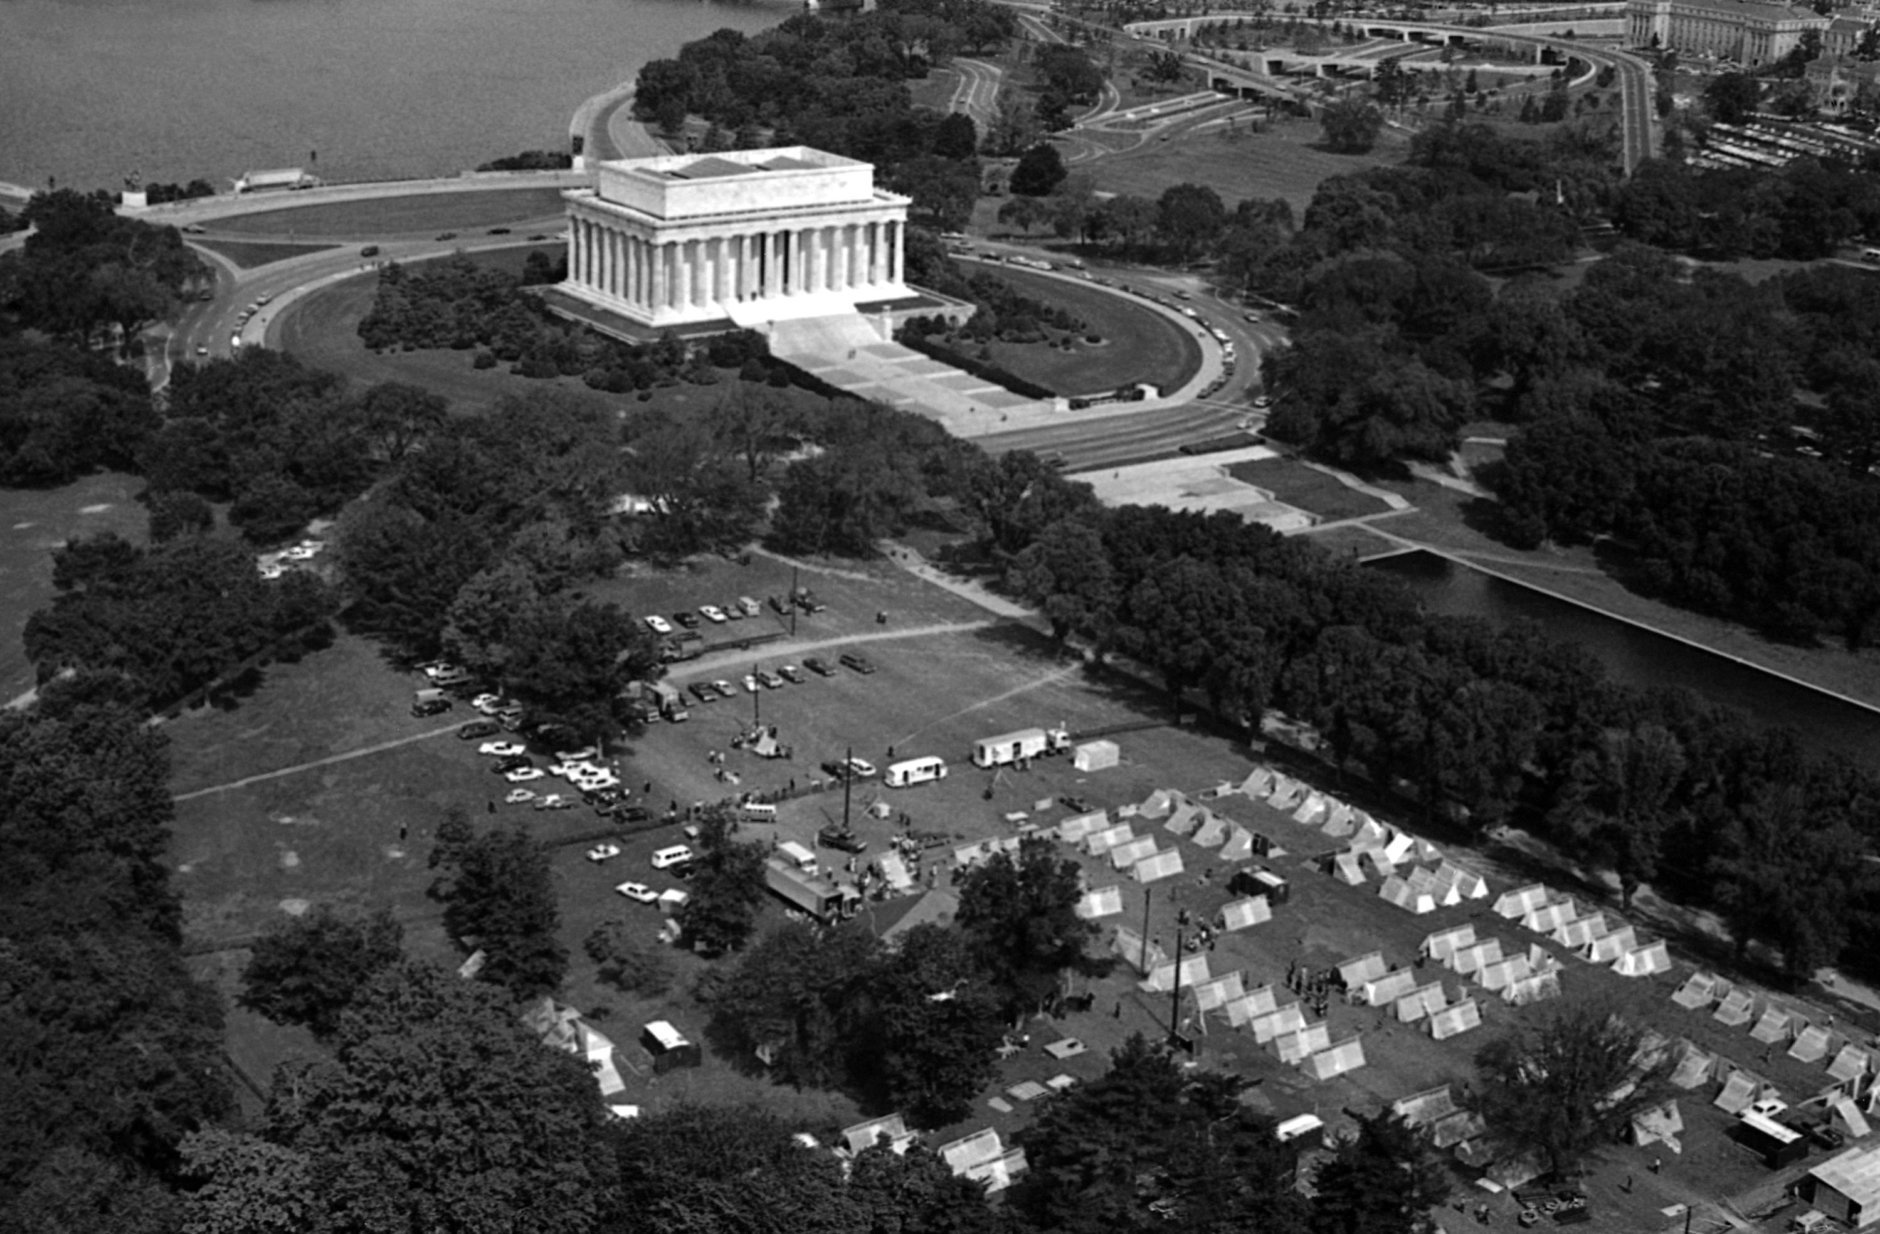 An aerial view of Poor People's Campaign tents, called Resurrection City in Washington, May 1968. (AP Photo/Barry Thumma)